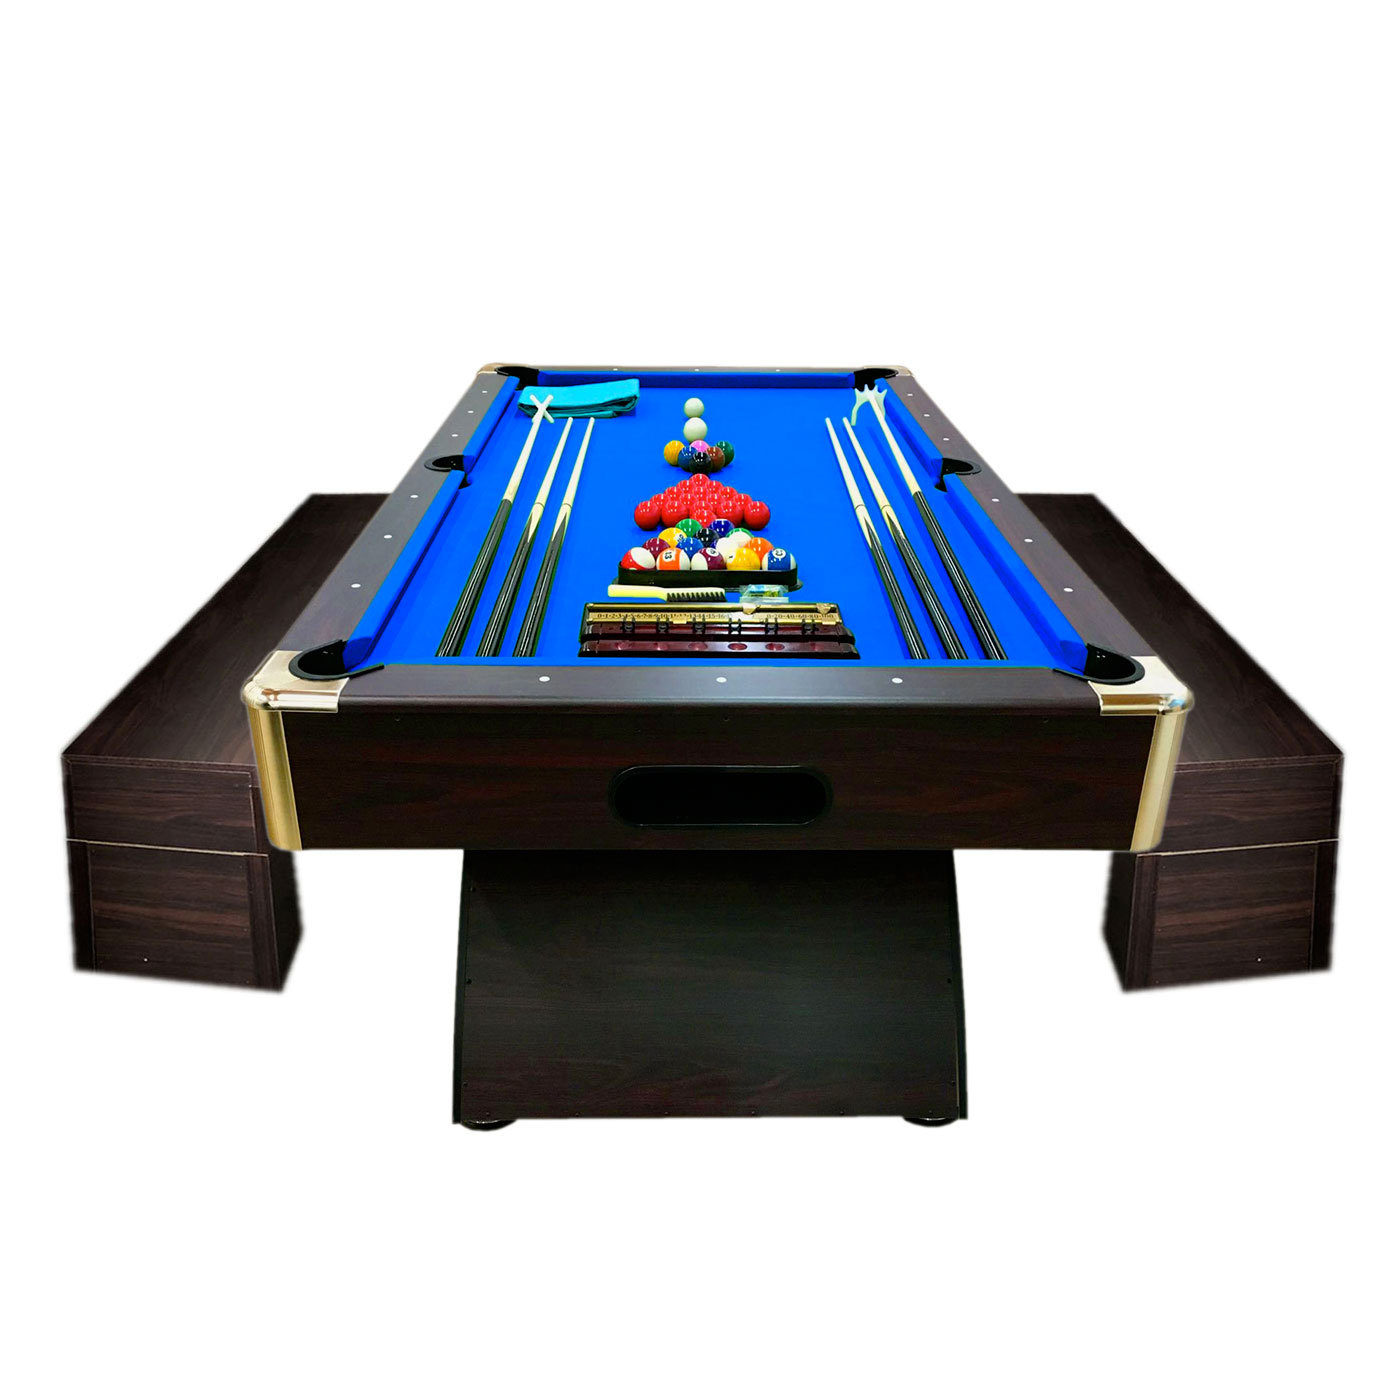 Primary image for 8' Feet Billiard Pool Table Snooker Full Accessories Bellagio Blue with Benches